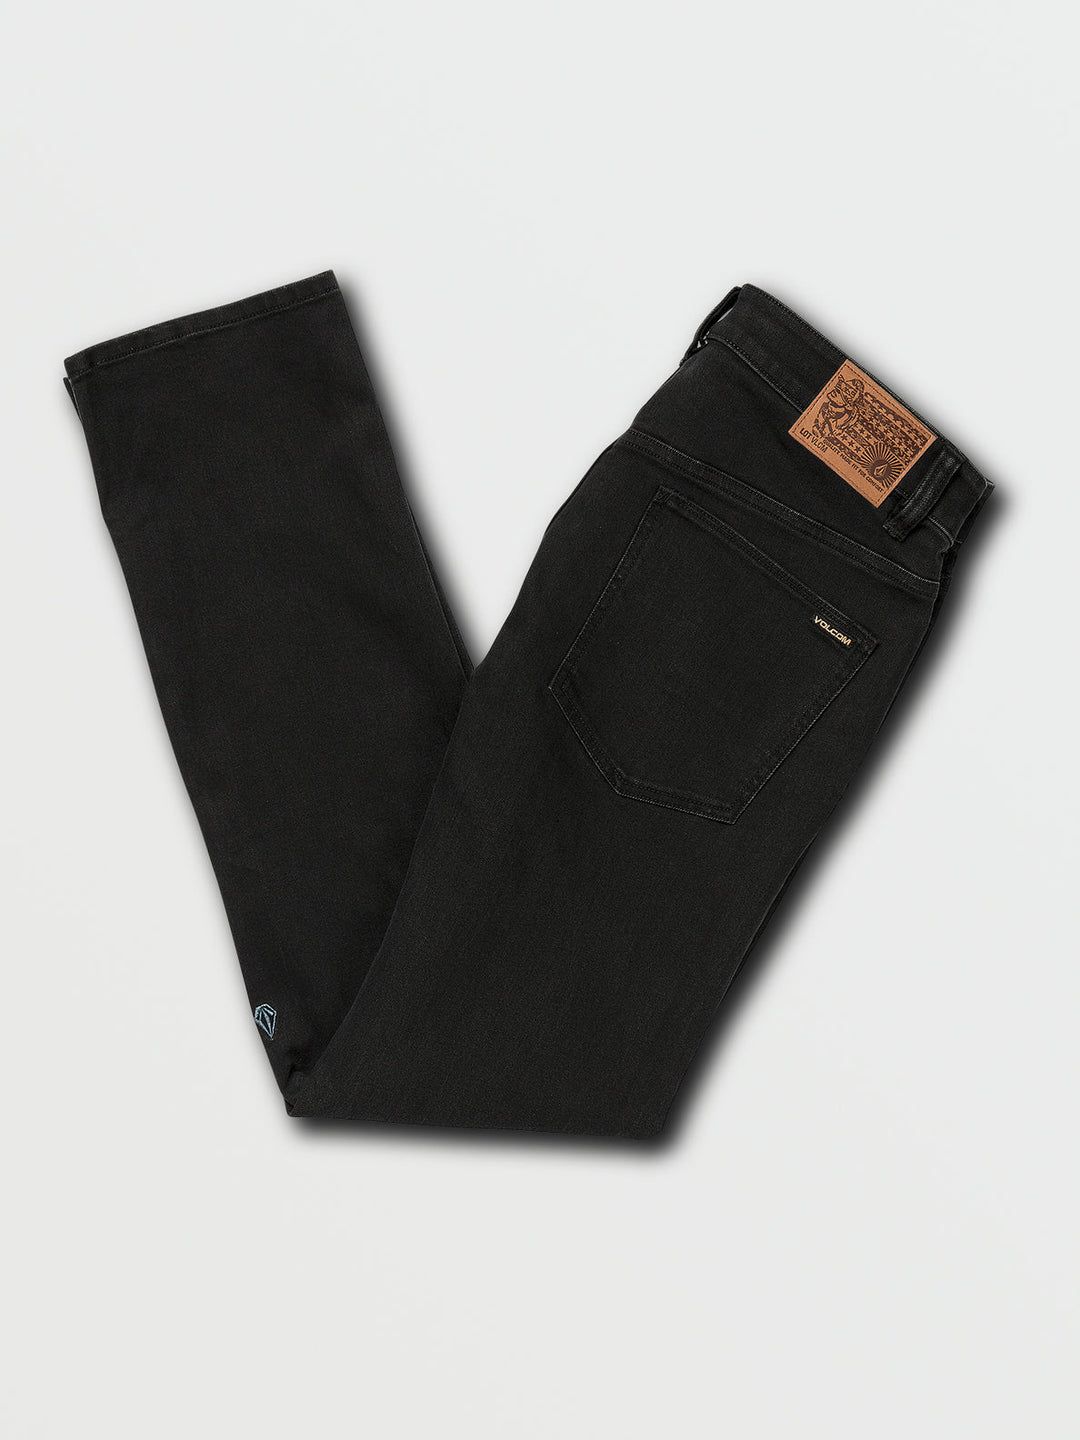 Volcom Solver Modern Fit Jeans - Black Out - Sun Diego Boardshop